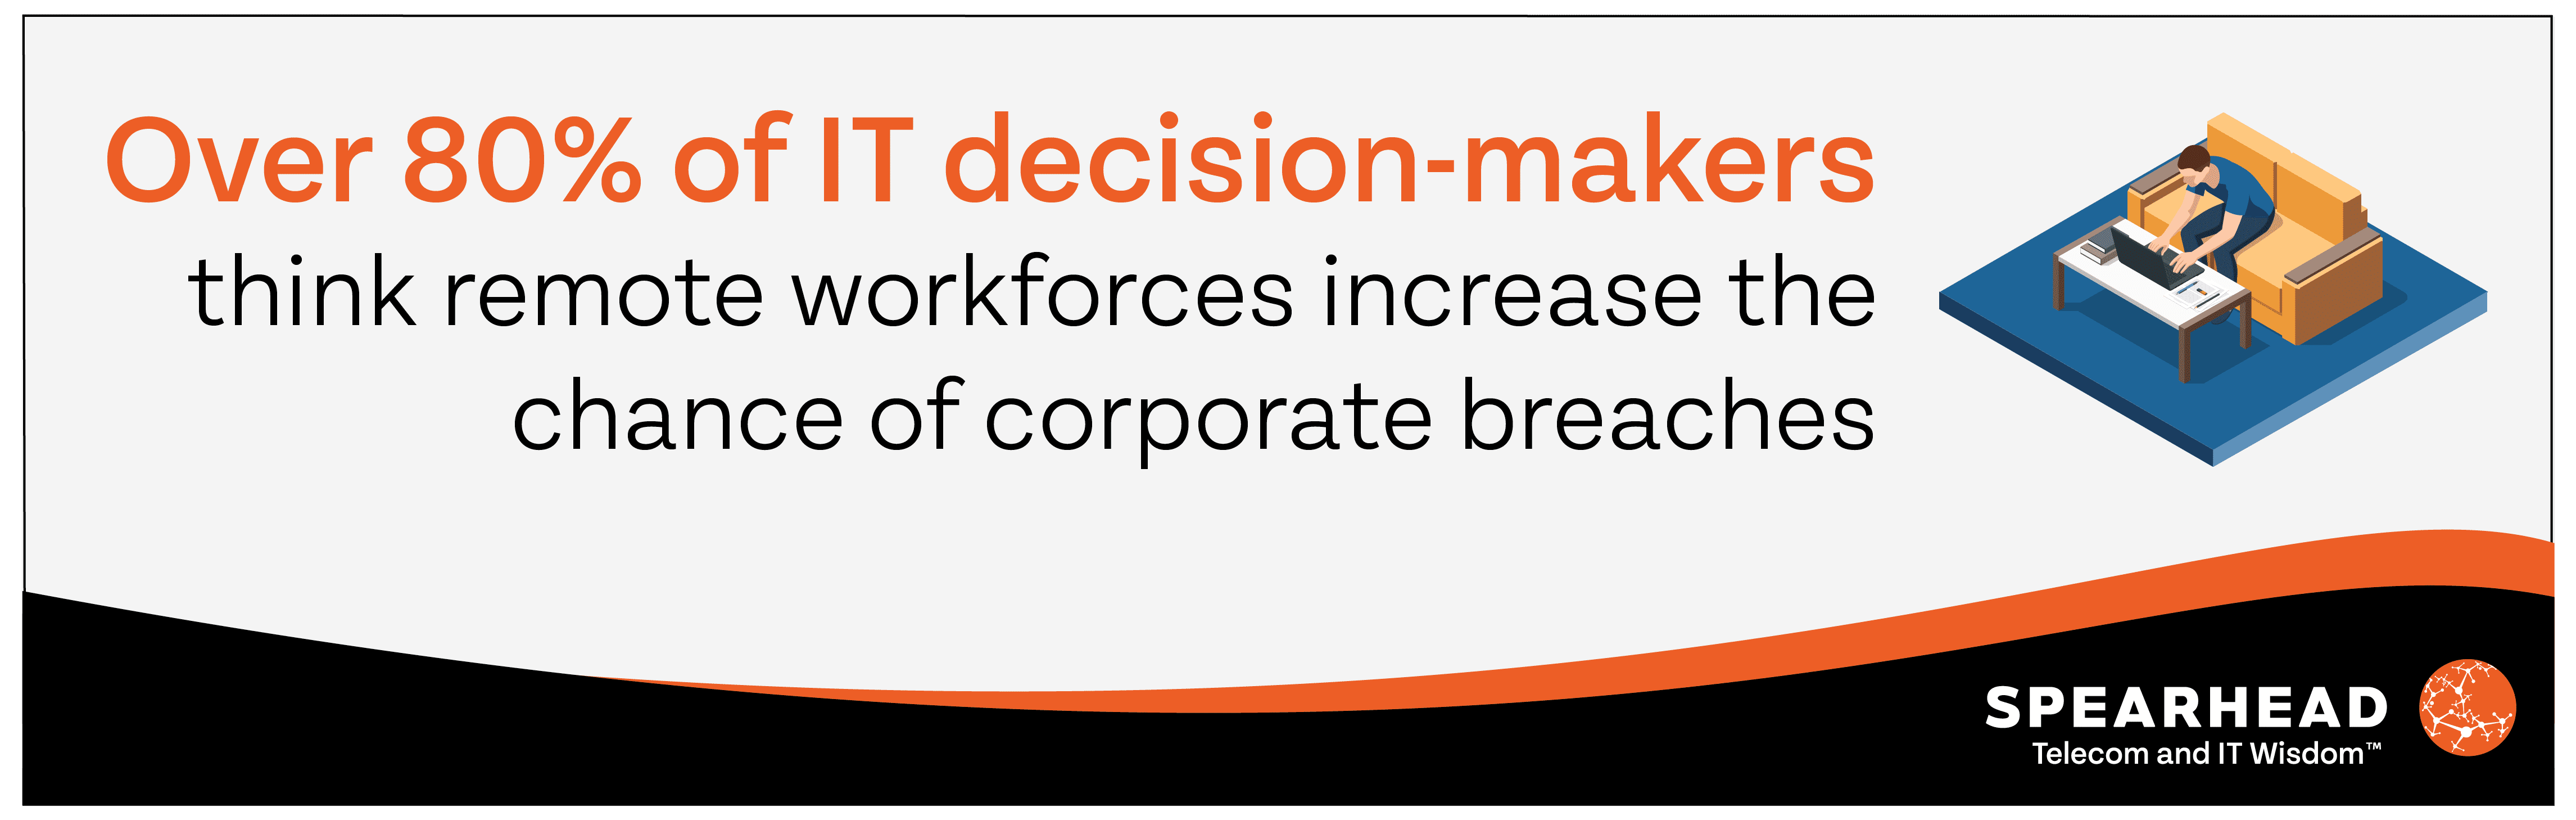 Graphic stating over 80% of IT decision makers think remote workforces increase the chance of corporate breaches